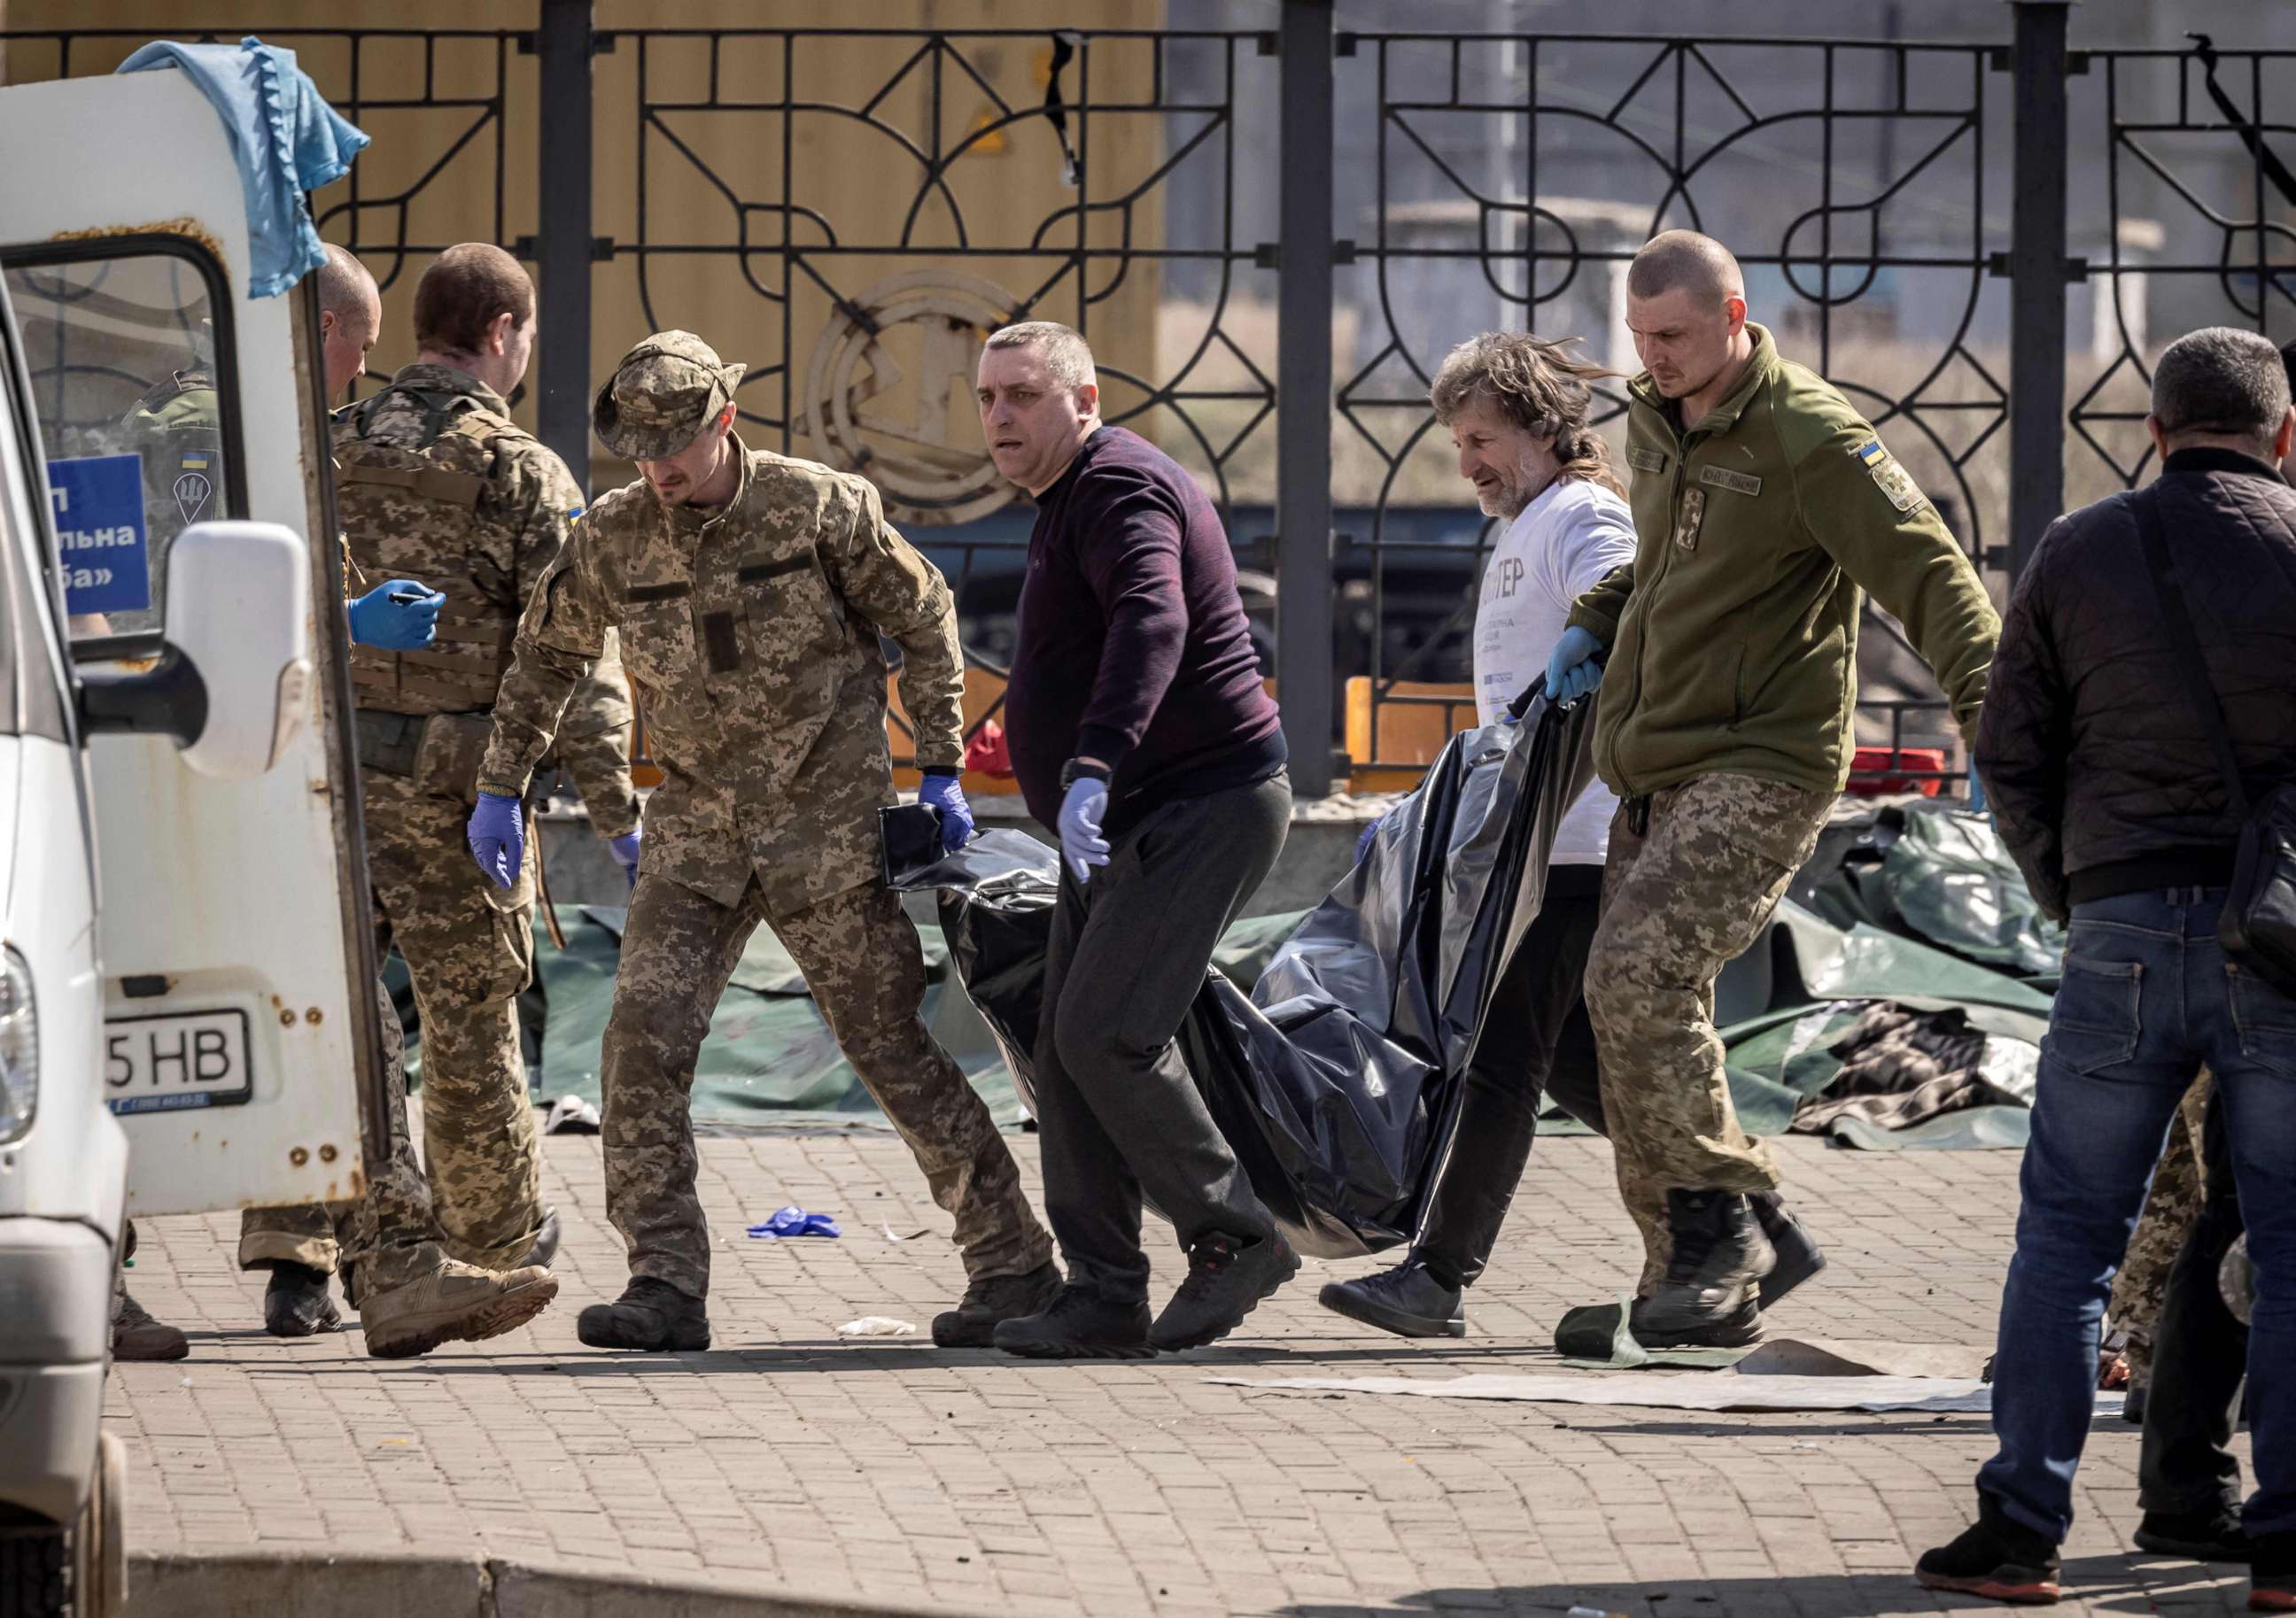 PHOTO: Soldiers clear out bodies after a rocket attack killed many people on Friday, April 8, 2022, at a train station in Kramatorsk, eastern Ukraine, being used for civilian evacuations.